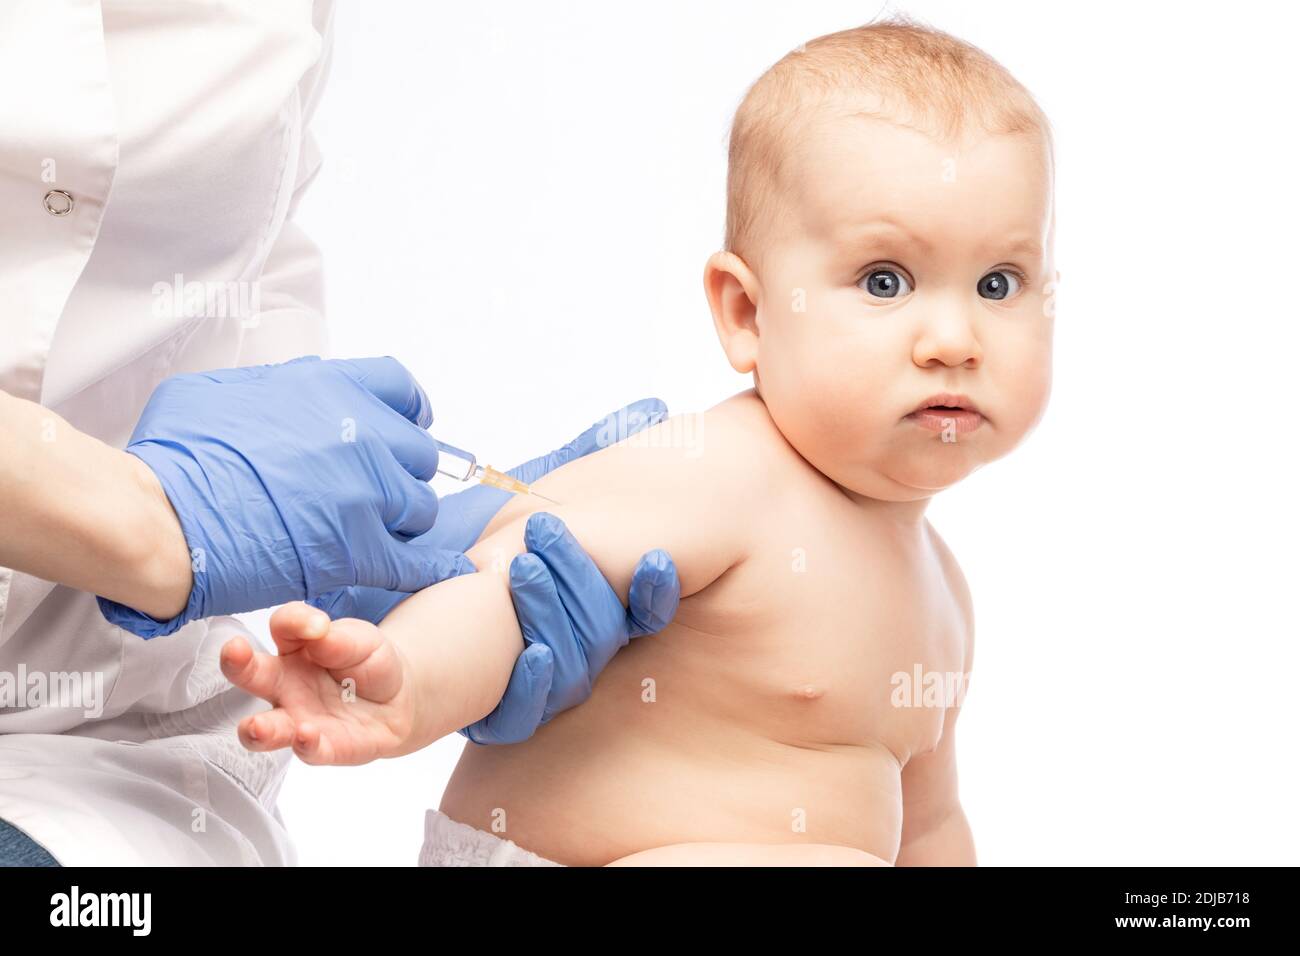 Pediatrician or nurse giving an intramuscular injection of a vaccine to arm of a baby girl during coronavirus COVID-19 pandemic Stock Photo